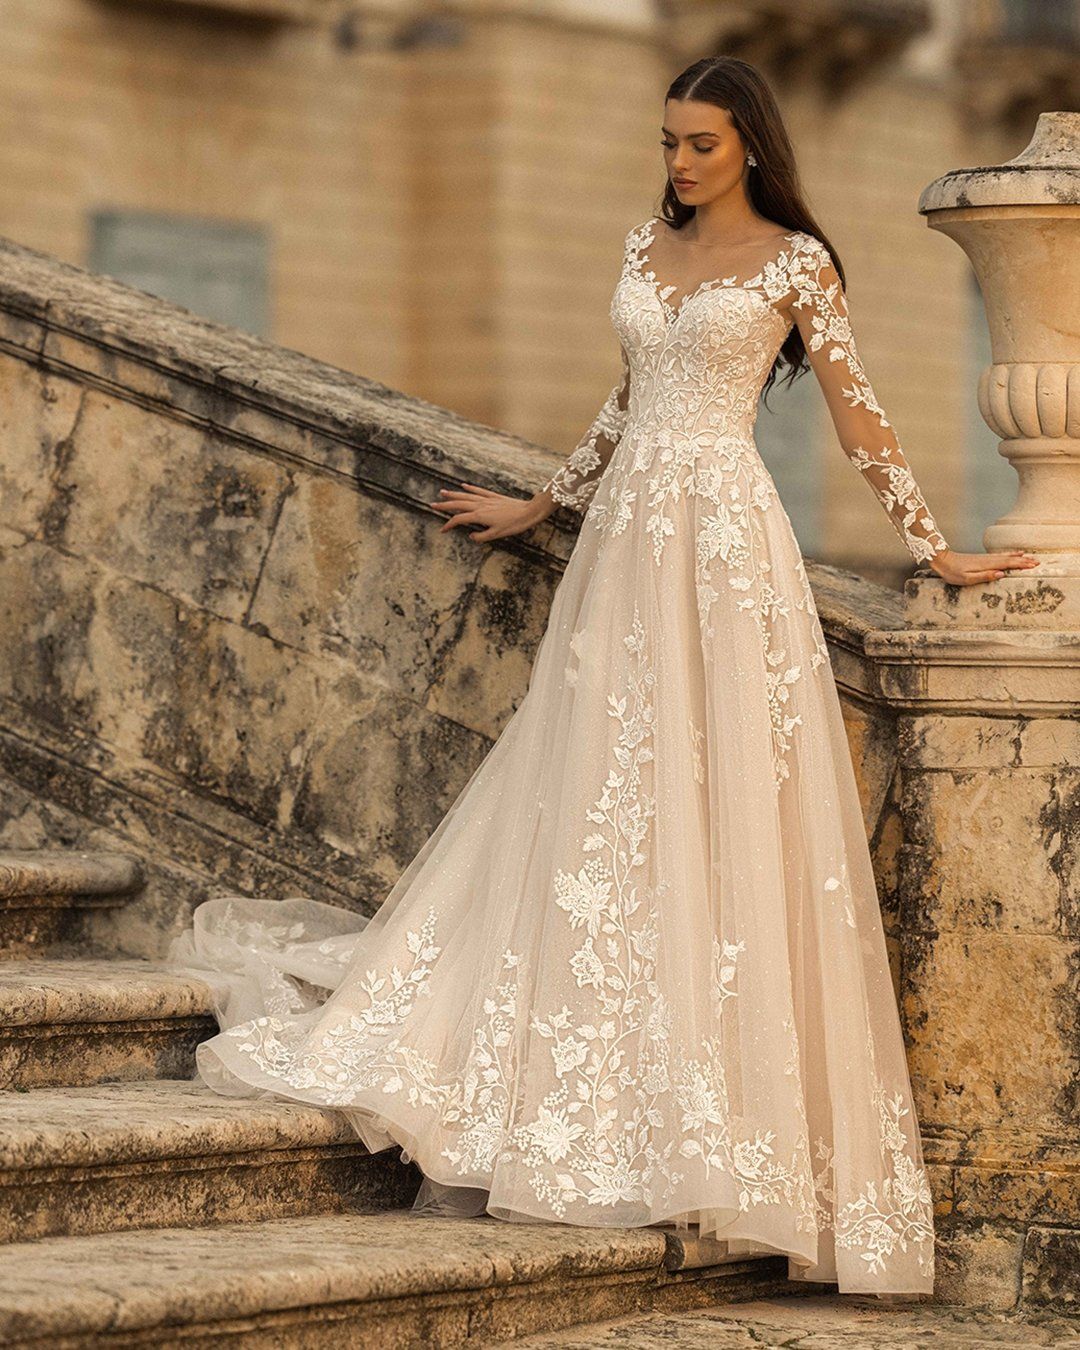 Beautiful dress for the beautiful day
with perfect dress material: vintage lace wedding dresses